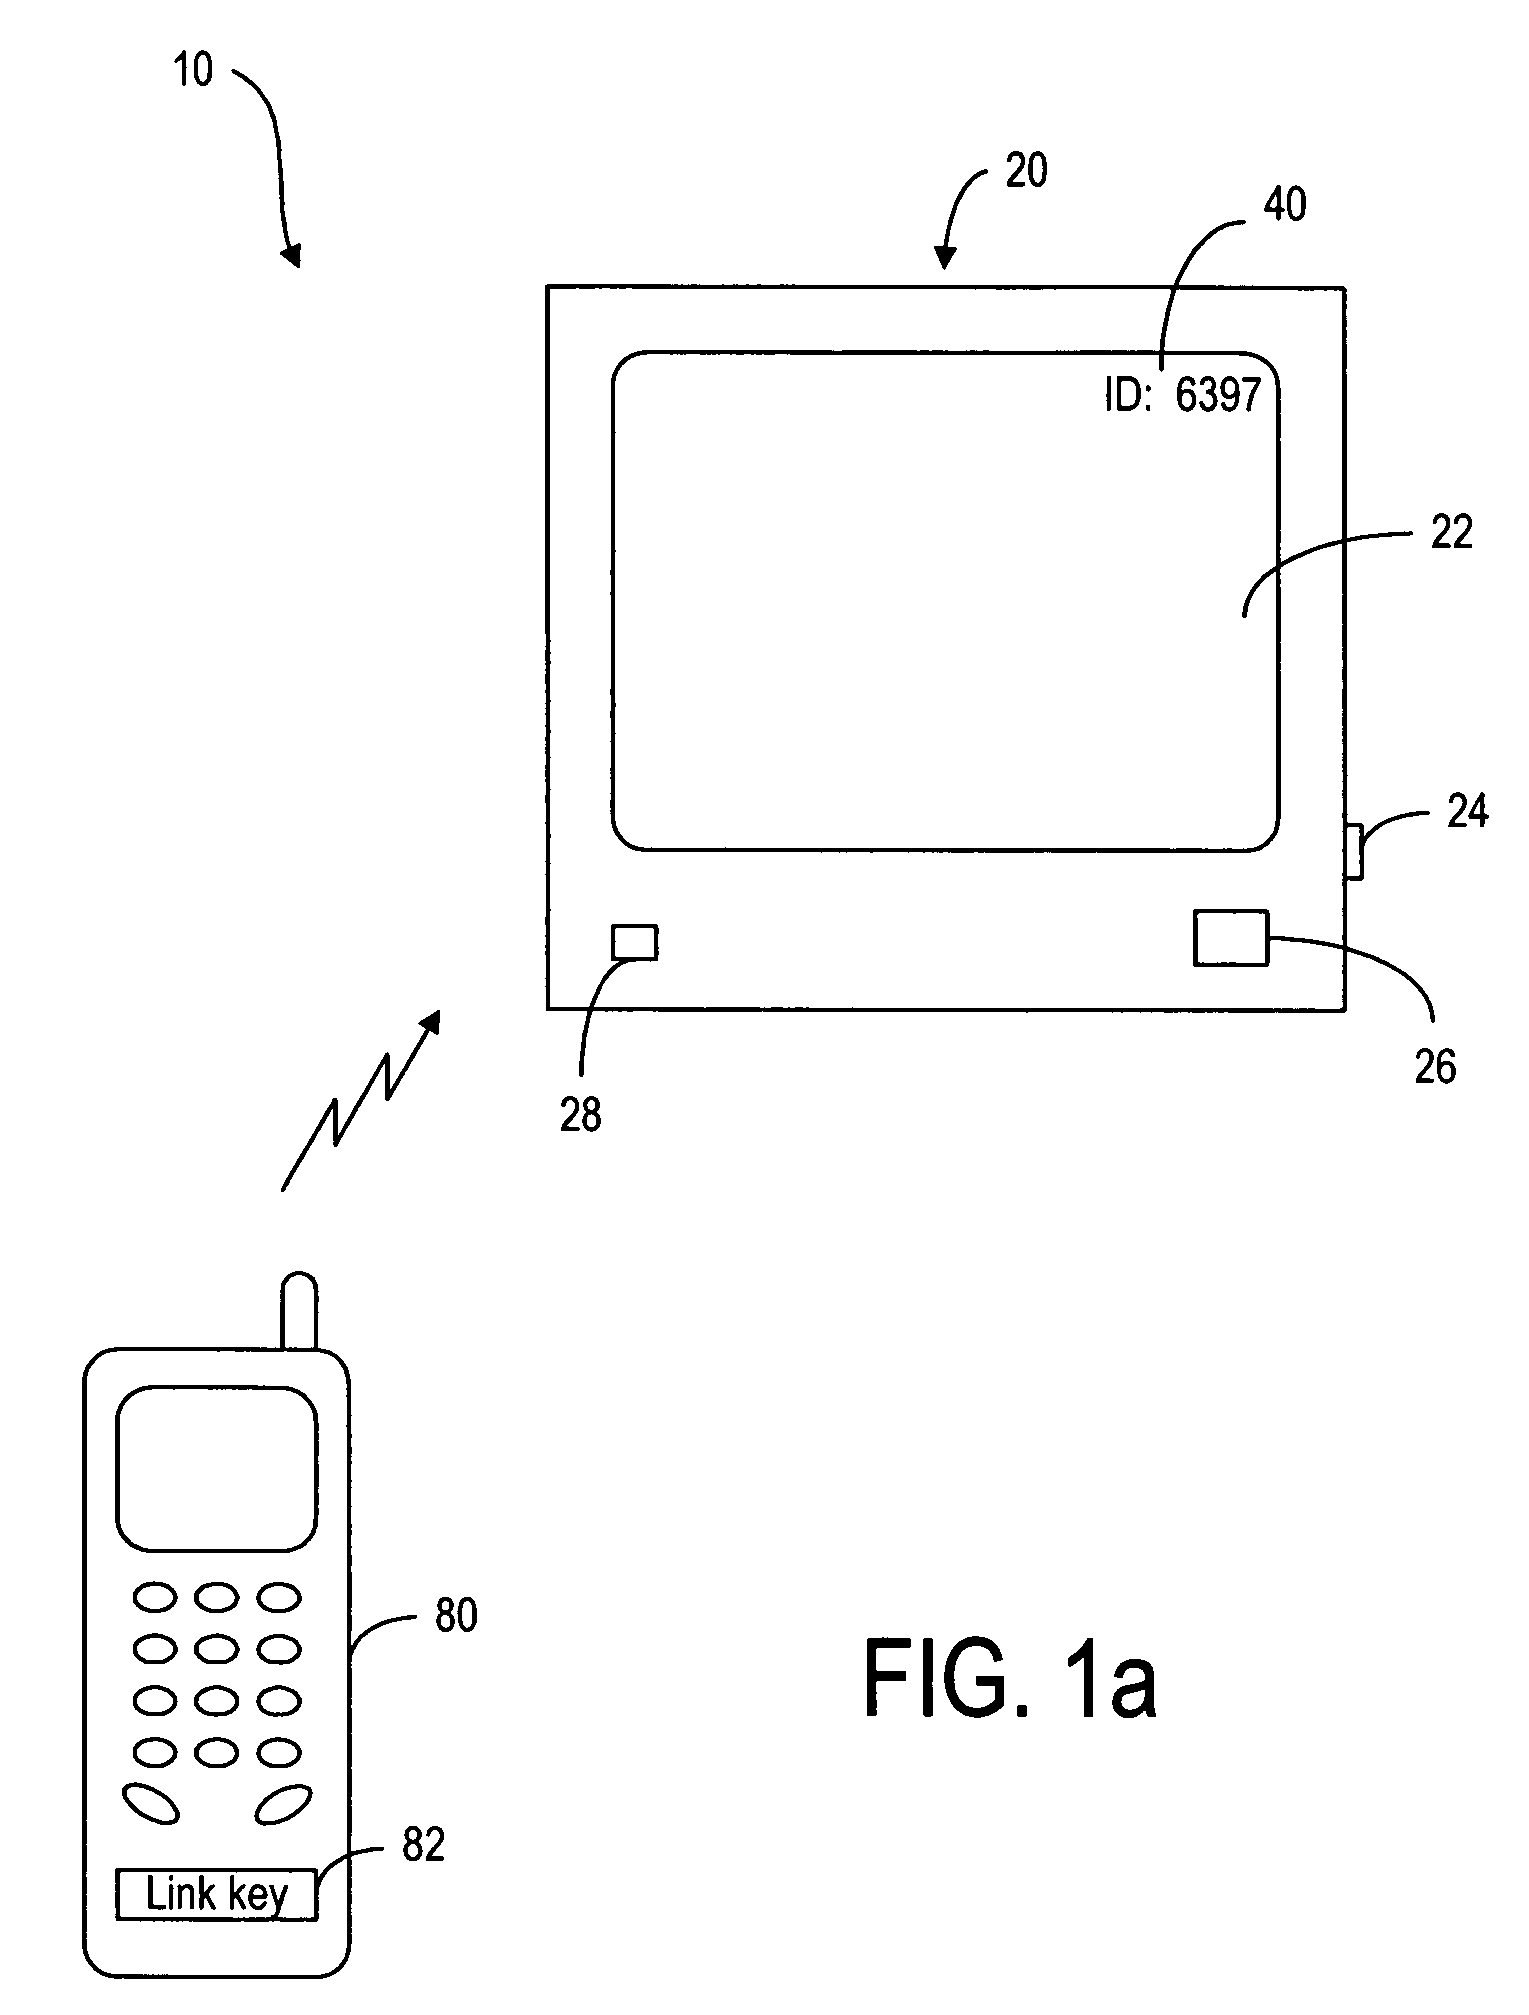 Method and device for identifying and pairing Bluetooth devices